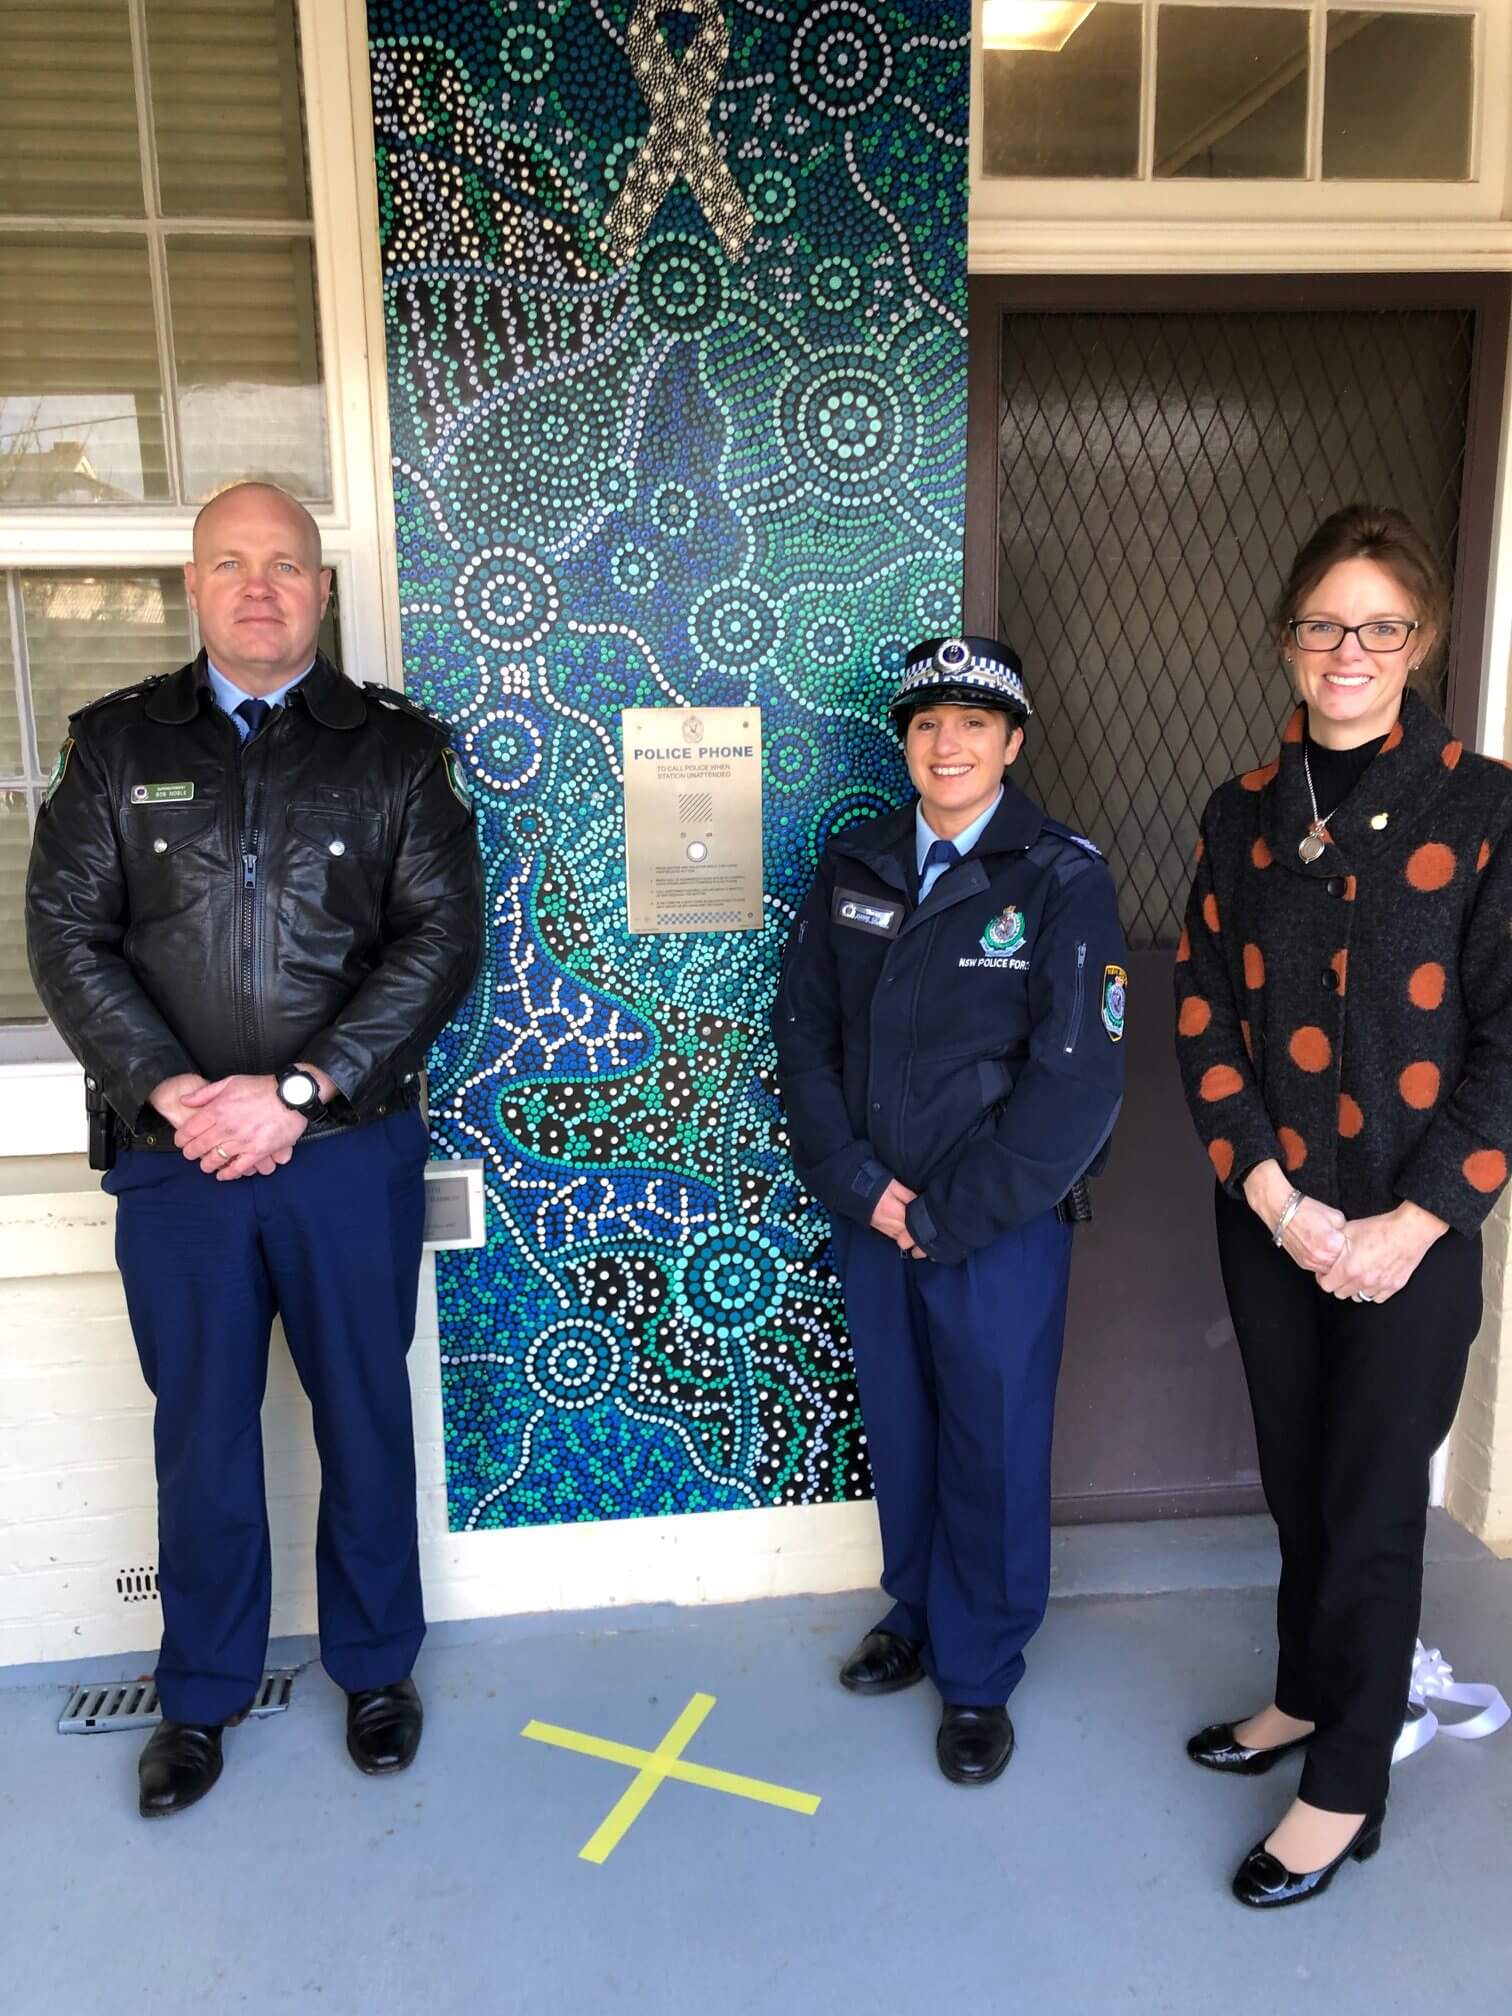 Superintendent Bob Noble, Sergeant Joanne Gallant and Steph Cooke MP stand in front of the blue, black and white indigenous artwork which features a prominent white ribbon